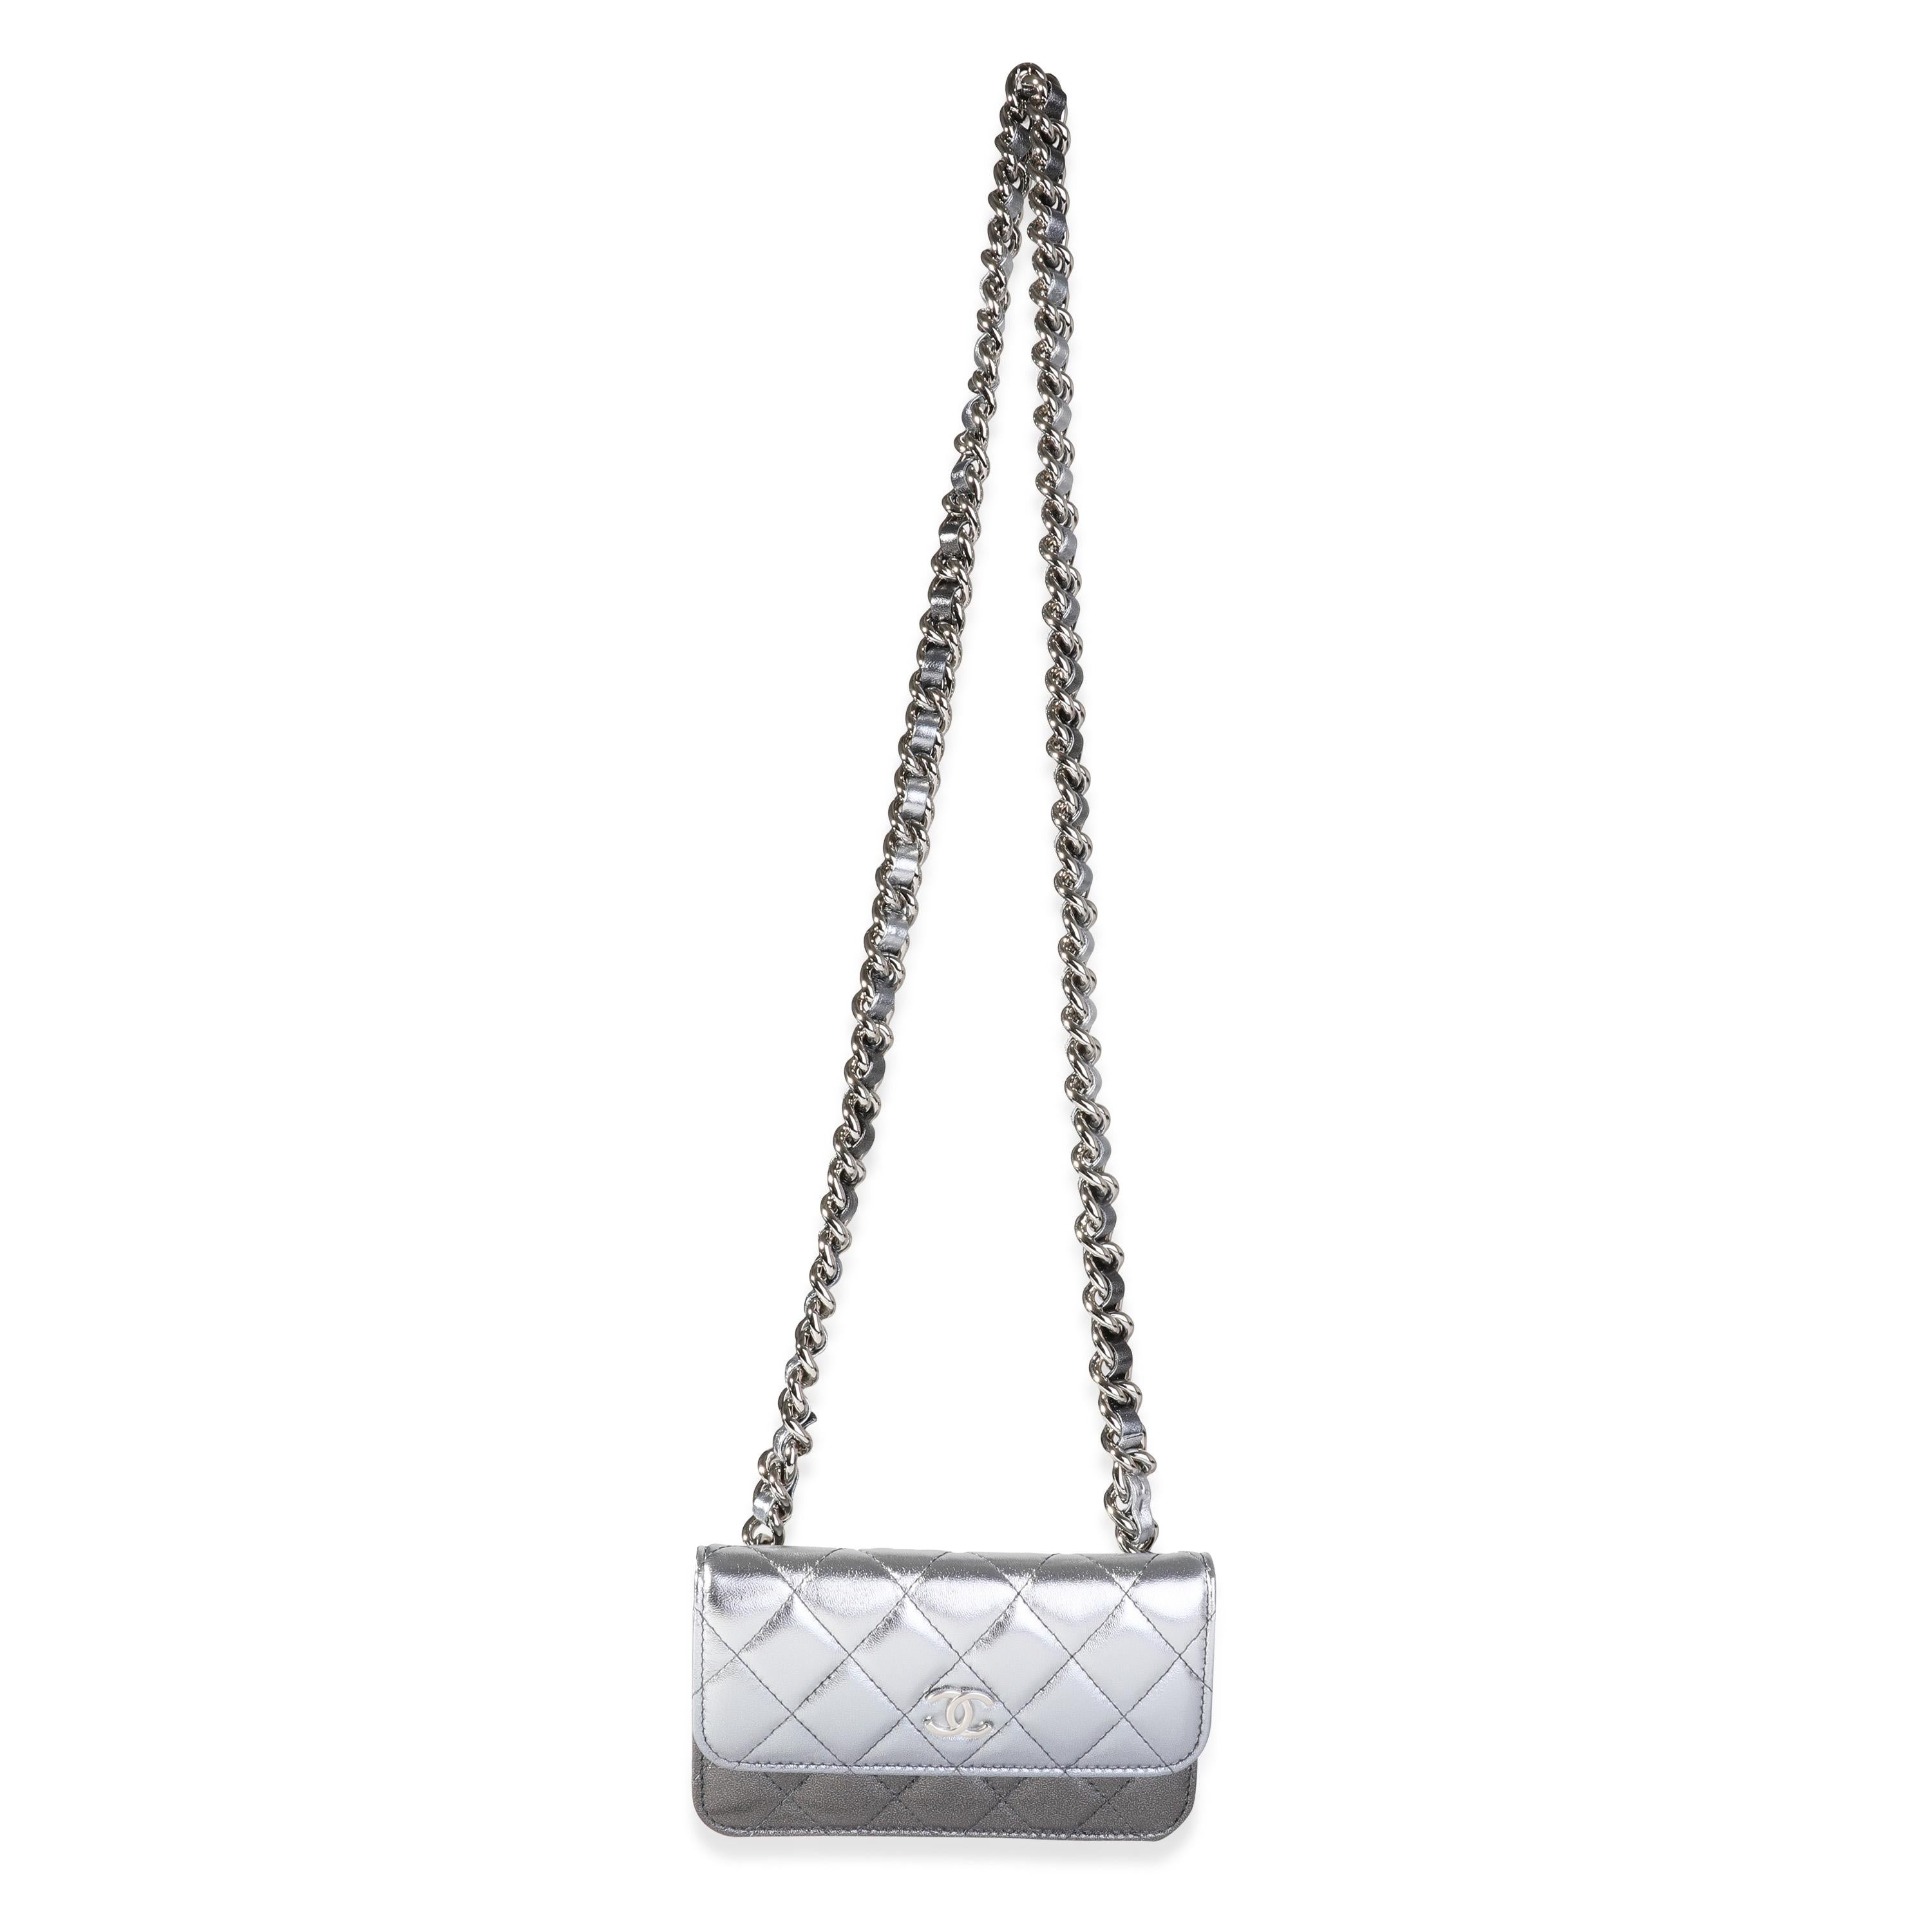 Listing Title: Chanel Metallic Gradient Quilted Lambskin Clutch with Chain
SKU: 116381
Condition: Pre-owned (3000)
Handbag Condition: Never Worn
Brand: Chanel
Model: Chanel Metallic Gradient Clutch with Chain
Origin Country: Italy
Handbag